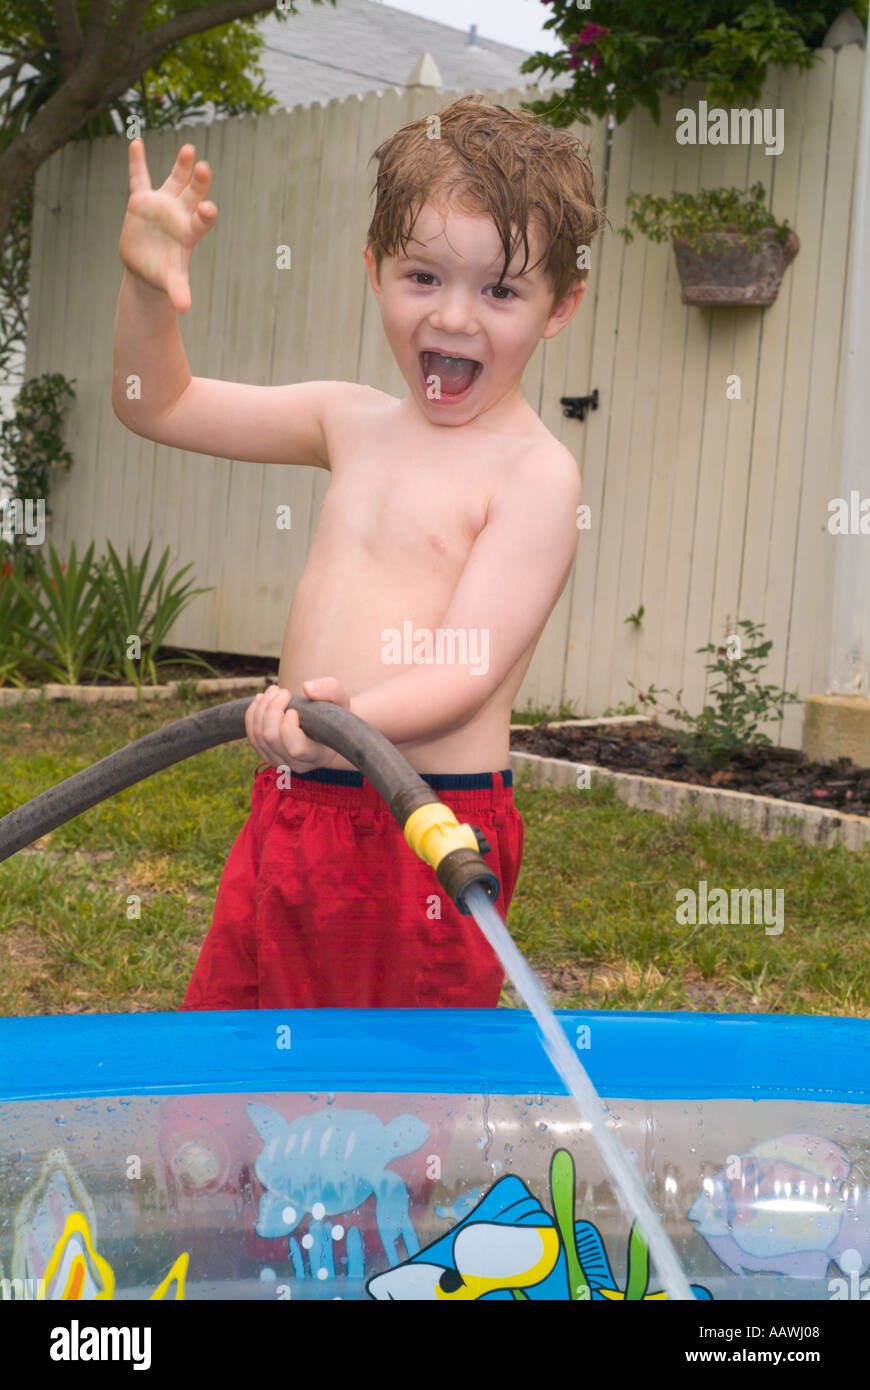 Boy Filling Pool With Water Child Children Boys Summer Playing Wet